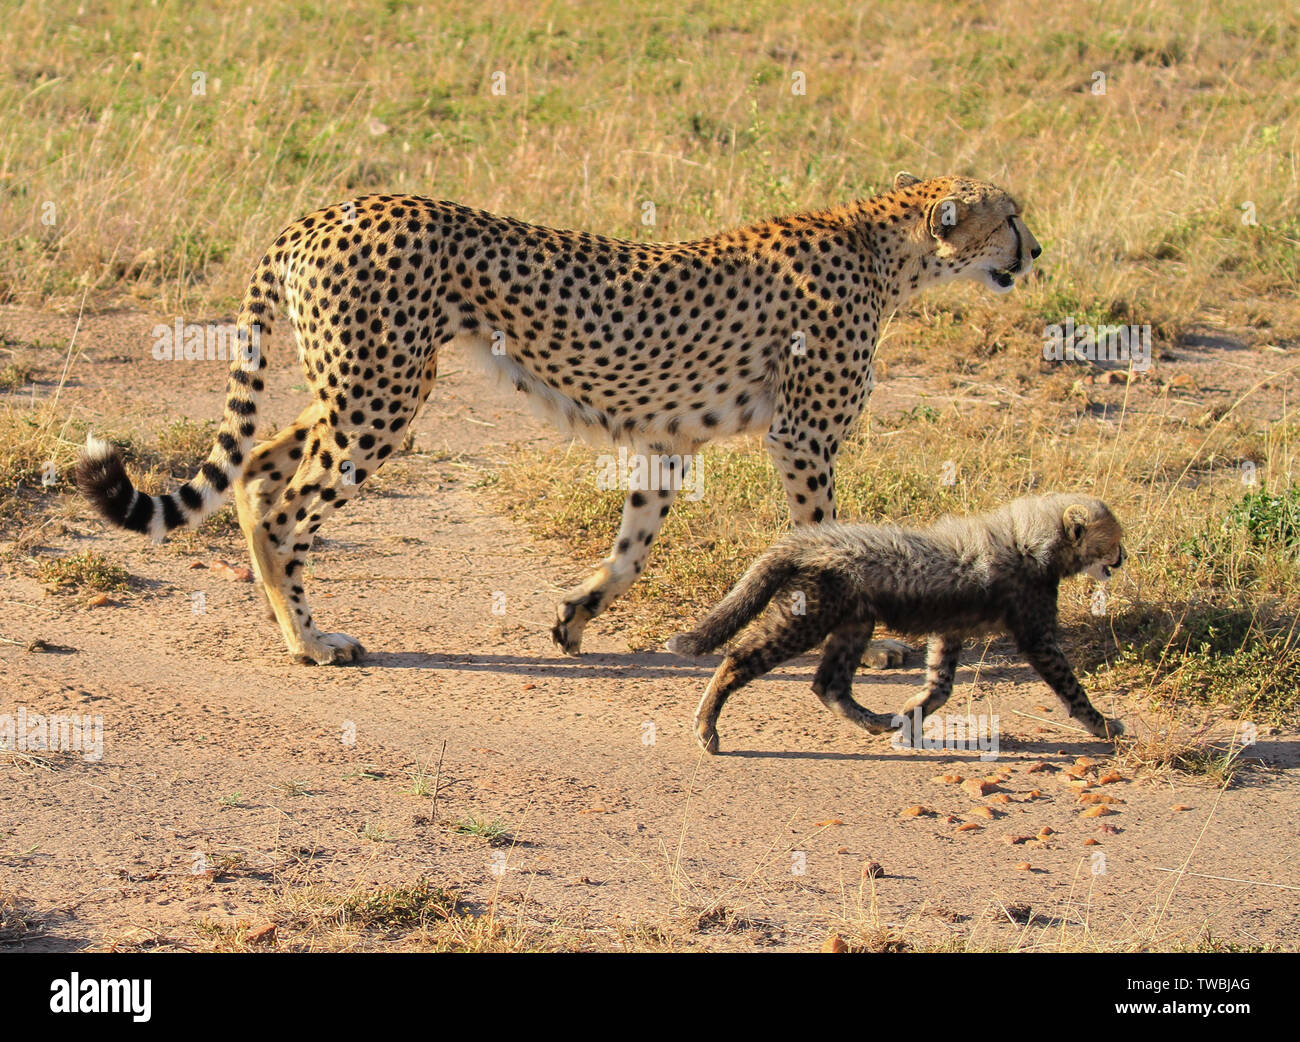 Cheetah Acinonyx jubatus Mother and adorable baby cub kitten with fur mantle walking together Masai Mara National Reserve Kenya East Africa side view Stock Photo